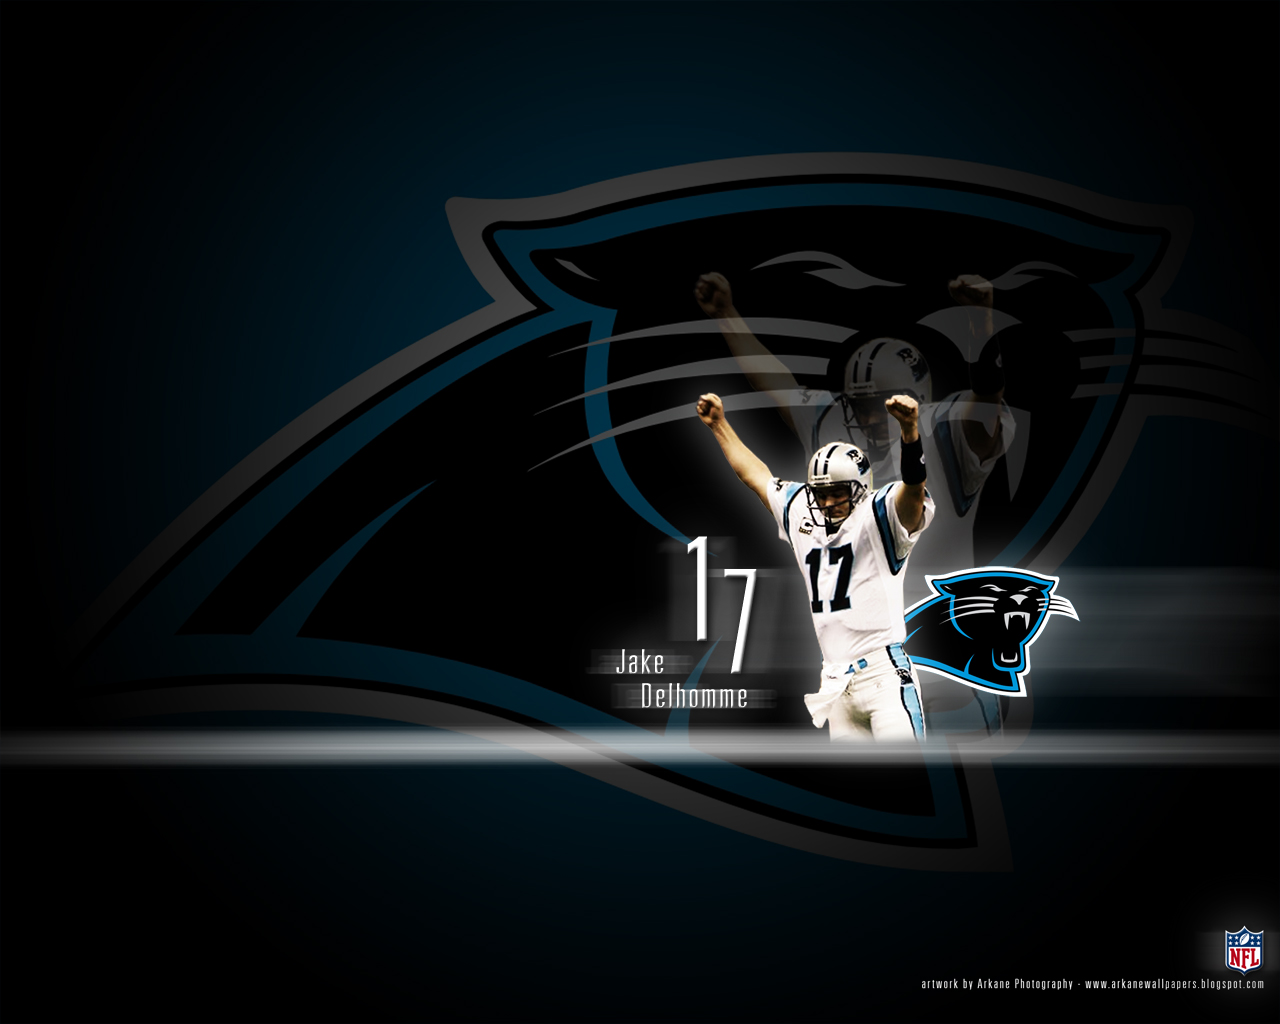 ... nfl wallpapers jake delhomme carolina panthers nfl wallpapers ray